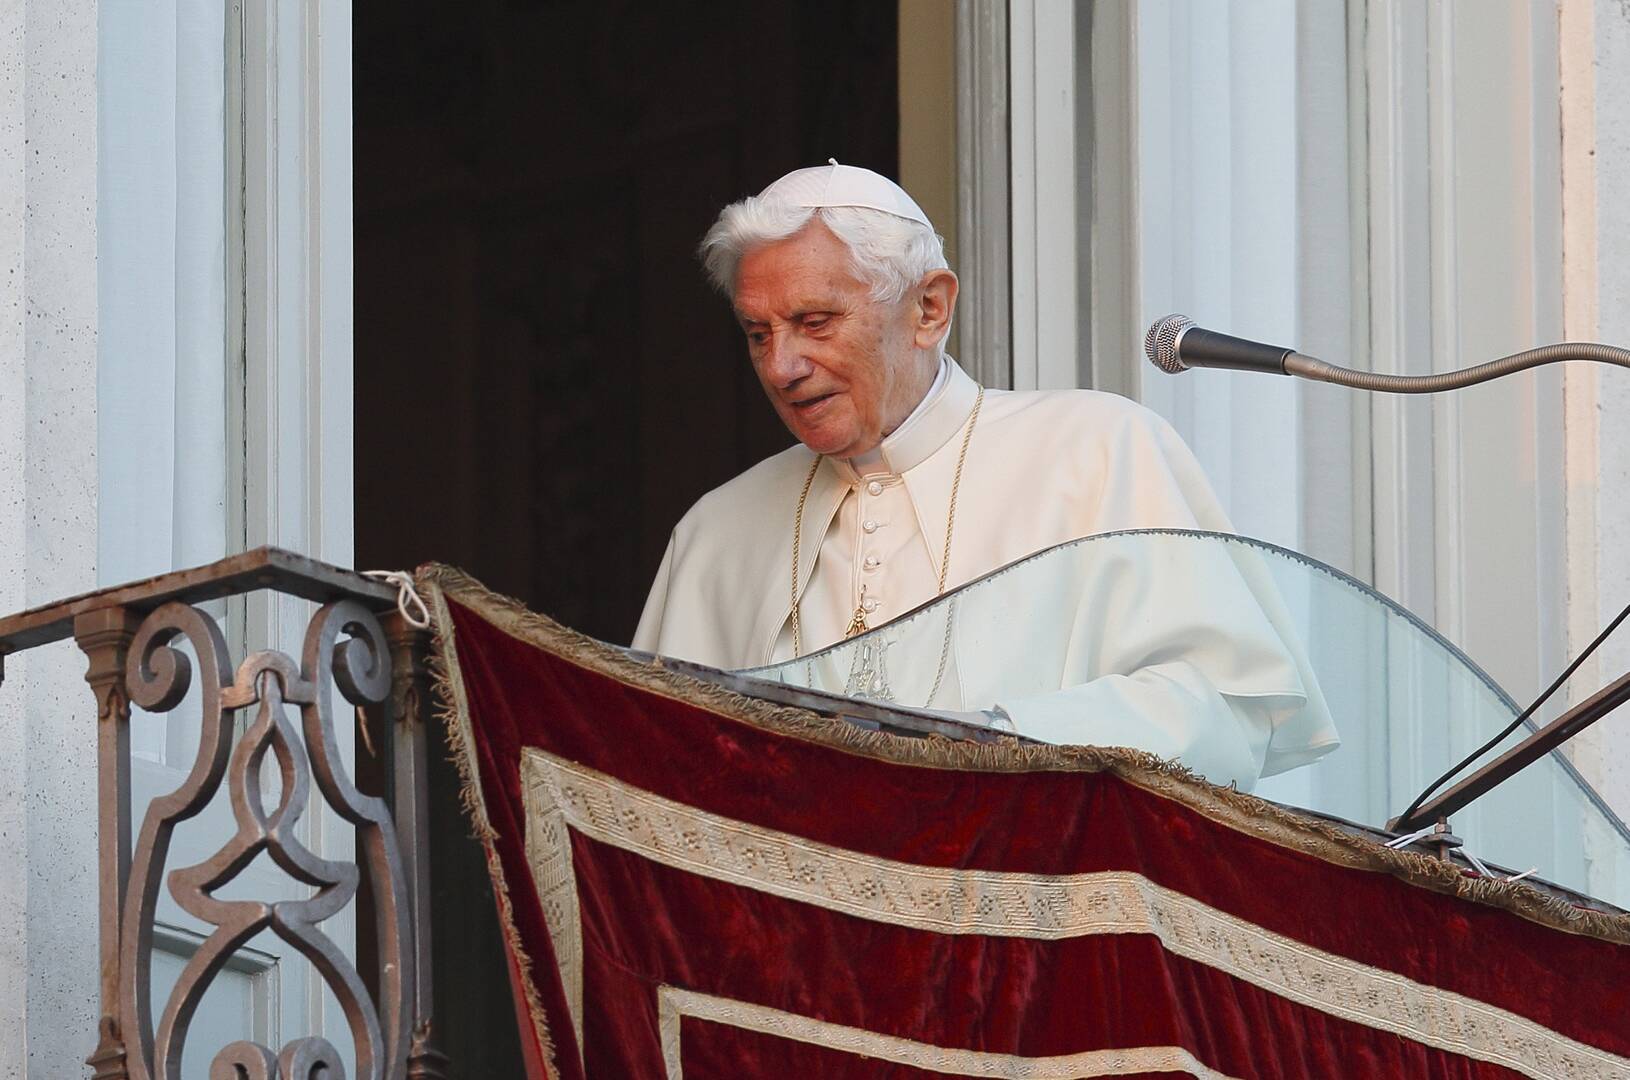 pope benedict turns and walks away in 2013 after he announced that he would be stepping down